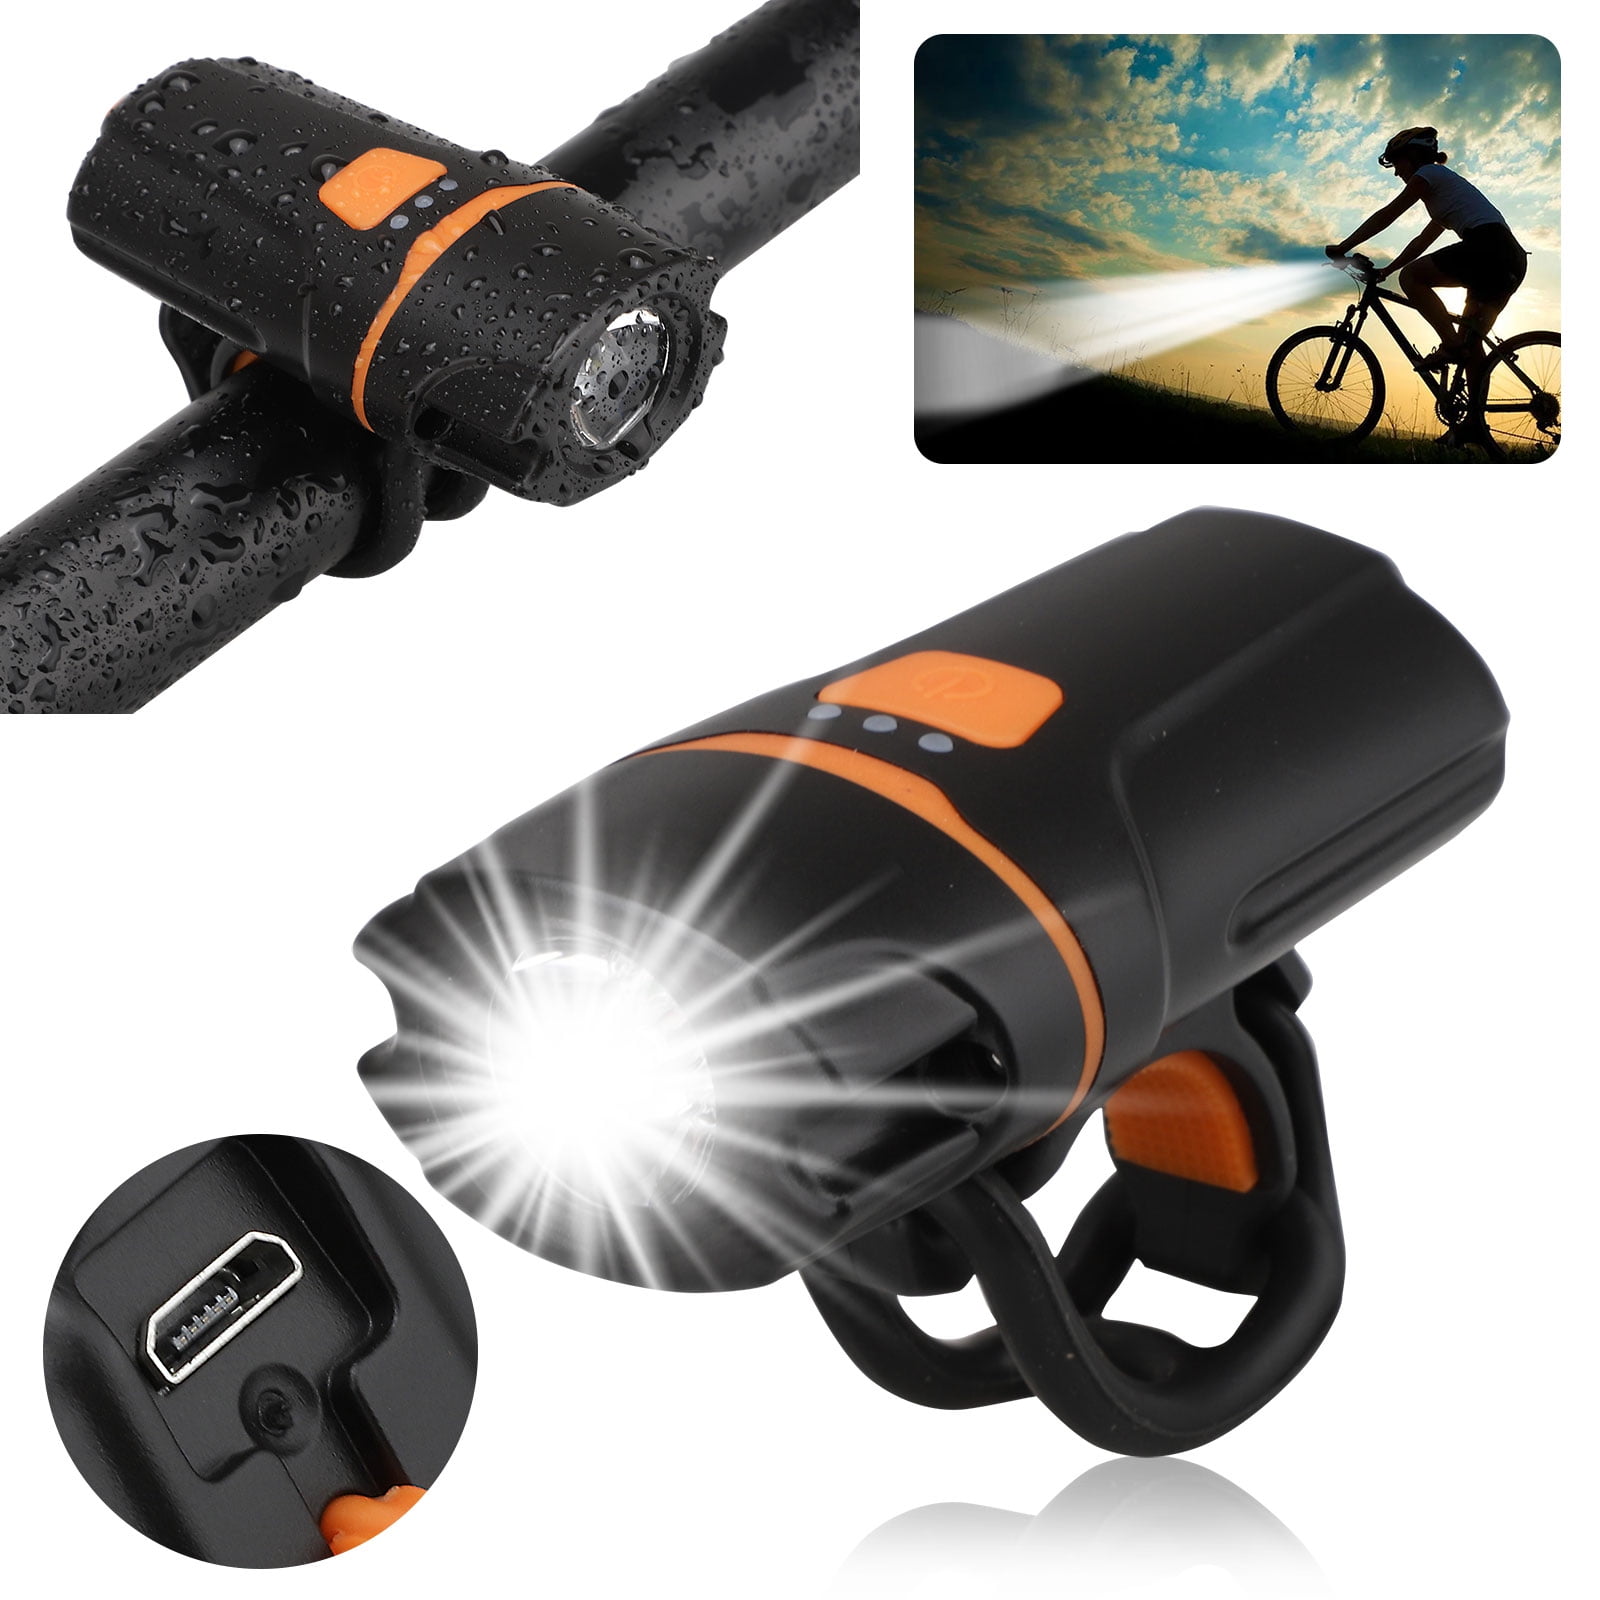 USB Rechargeable LED Bicycle Bright Bike Front Headlight Lamp Waterproof Light